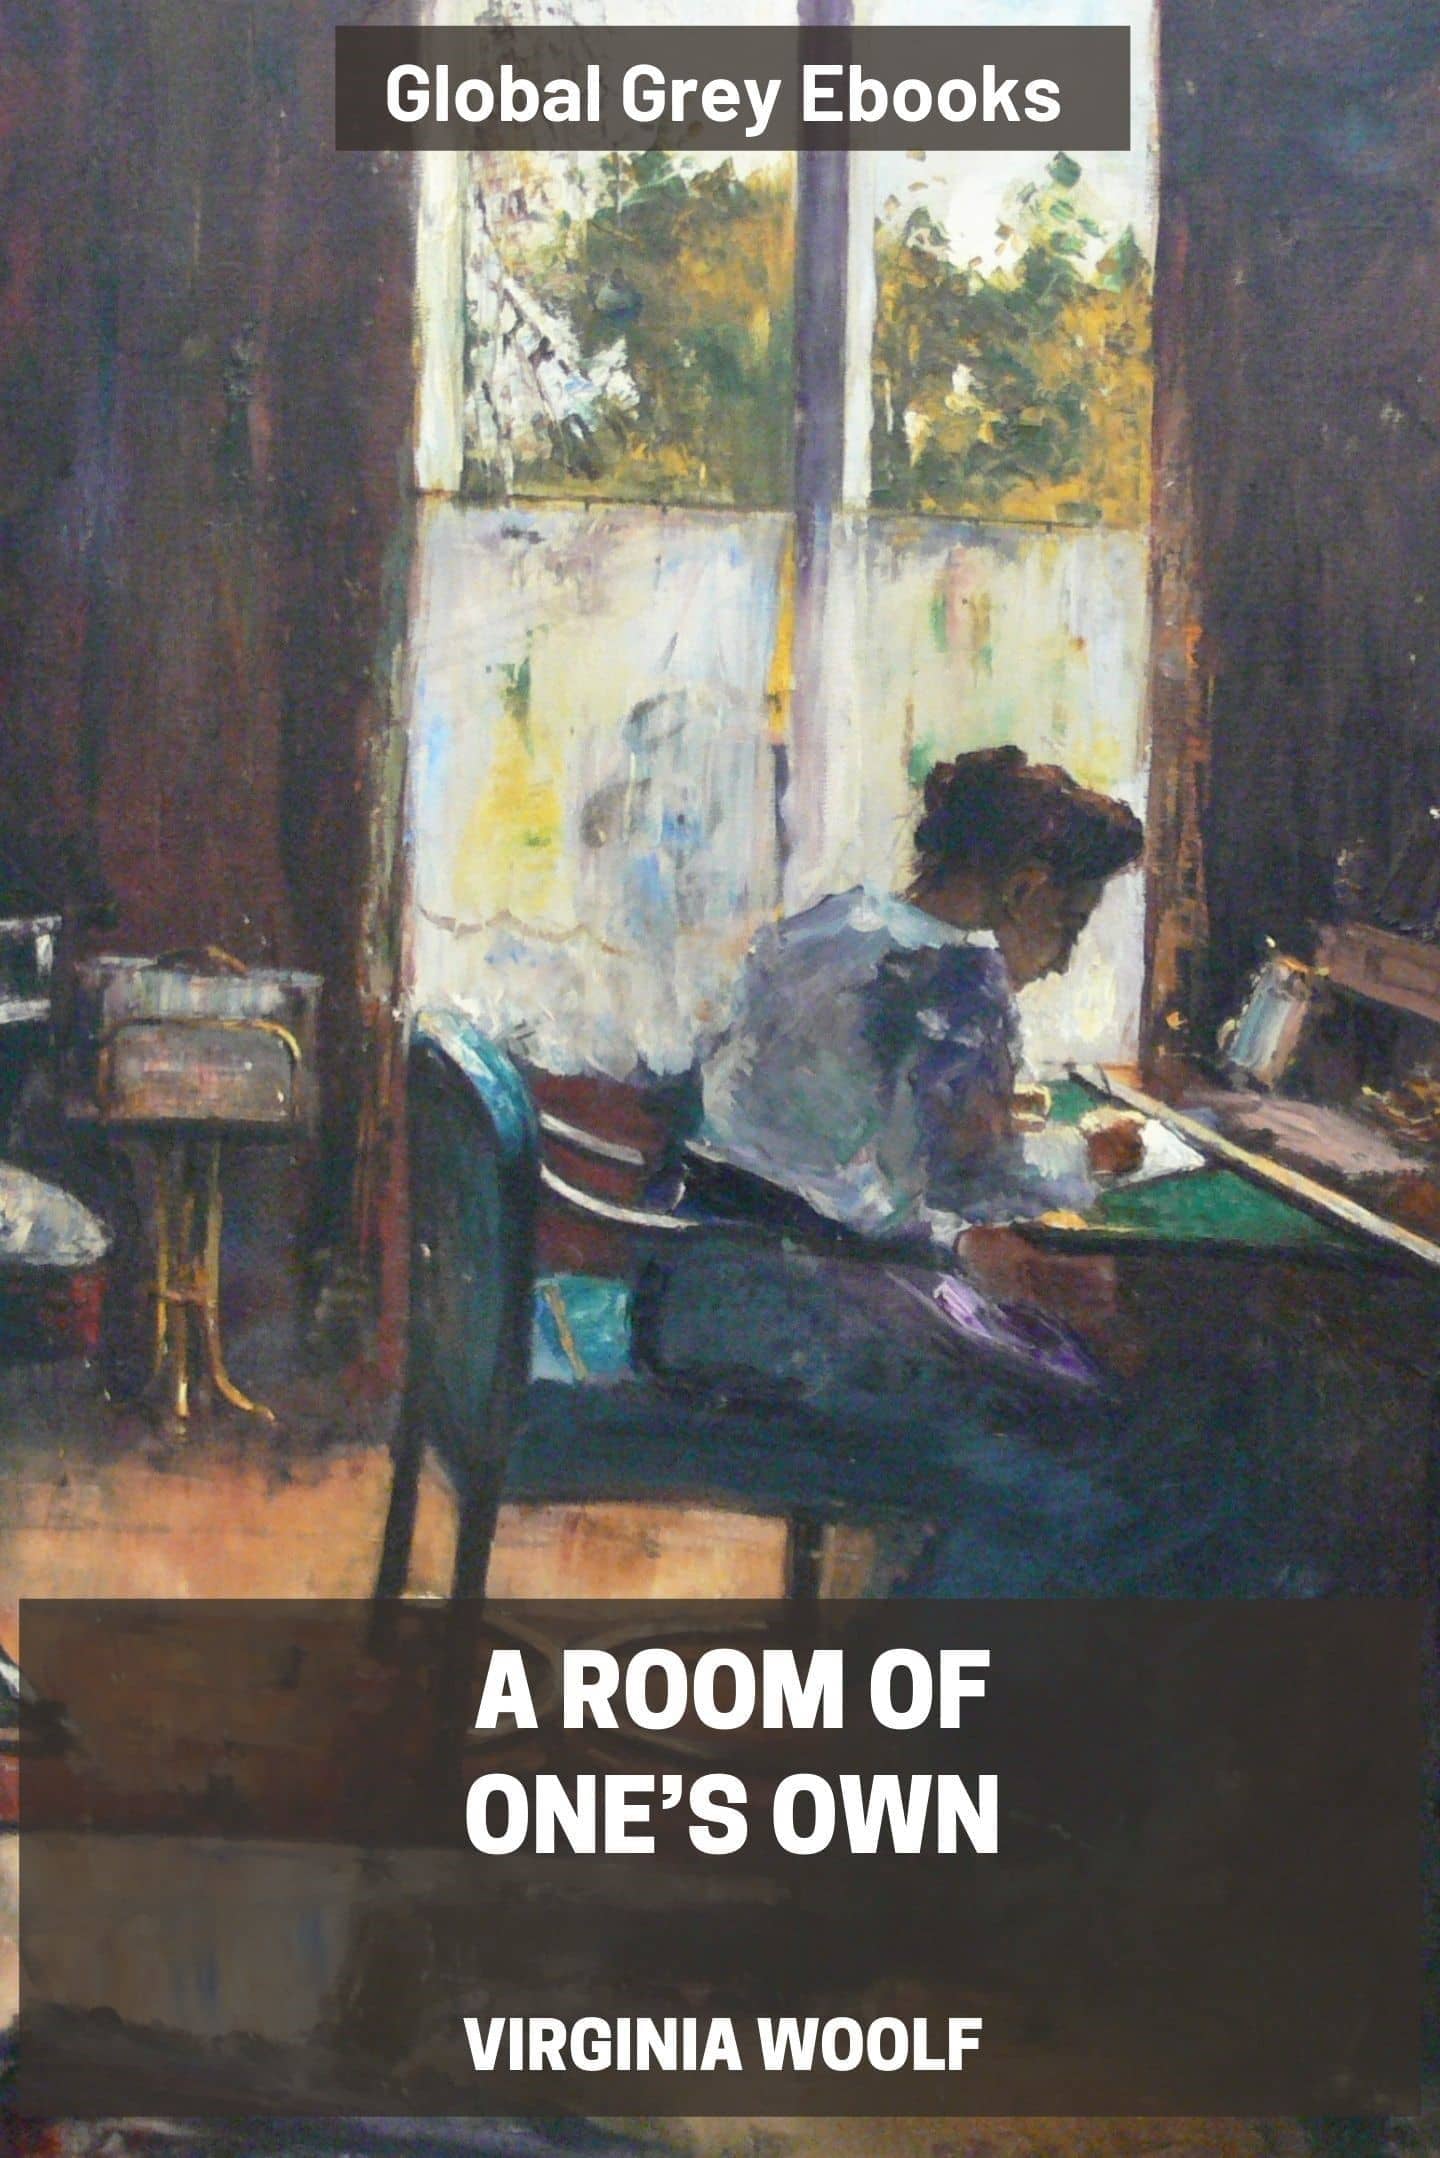 virginia woolf essay a room of one's own